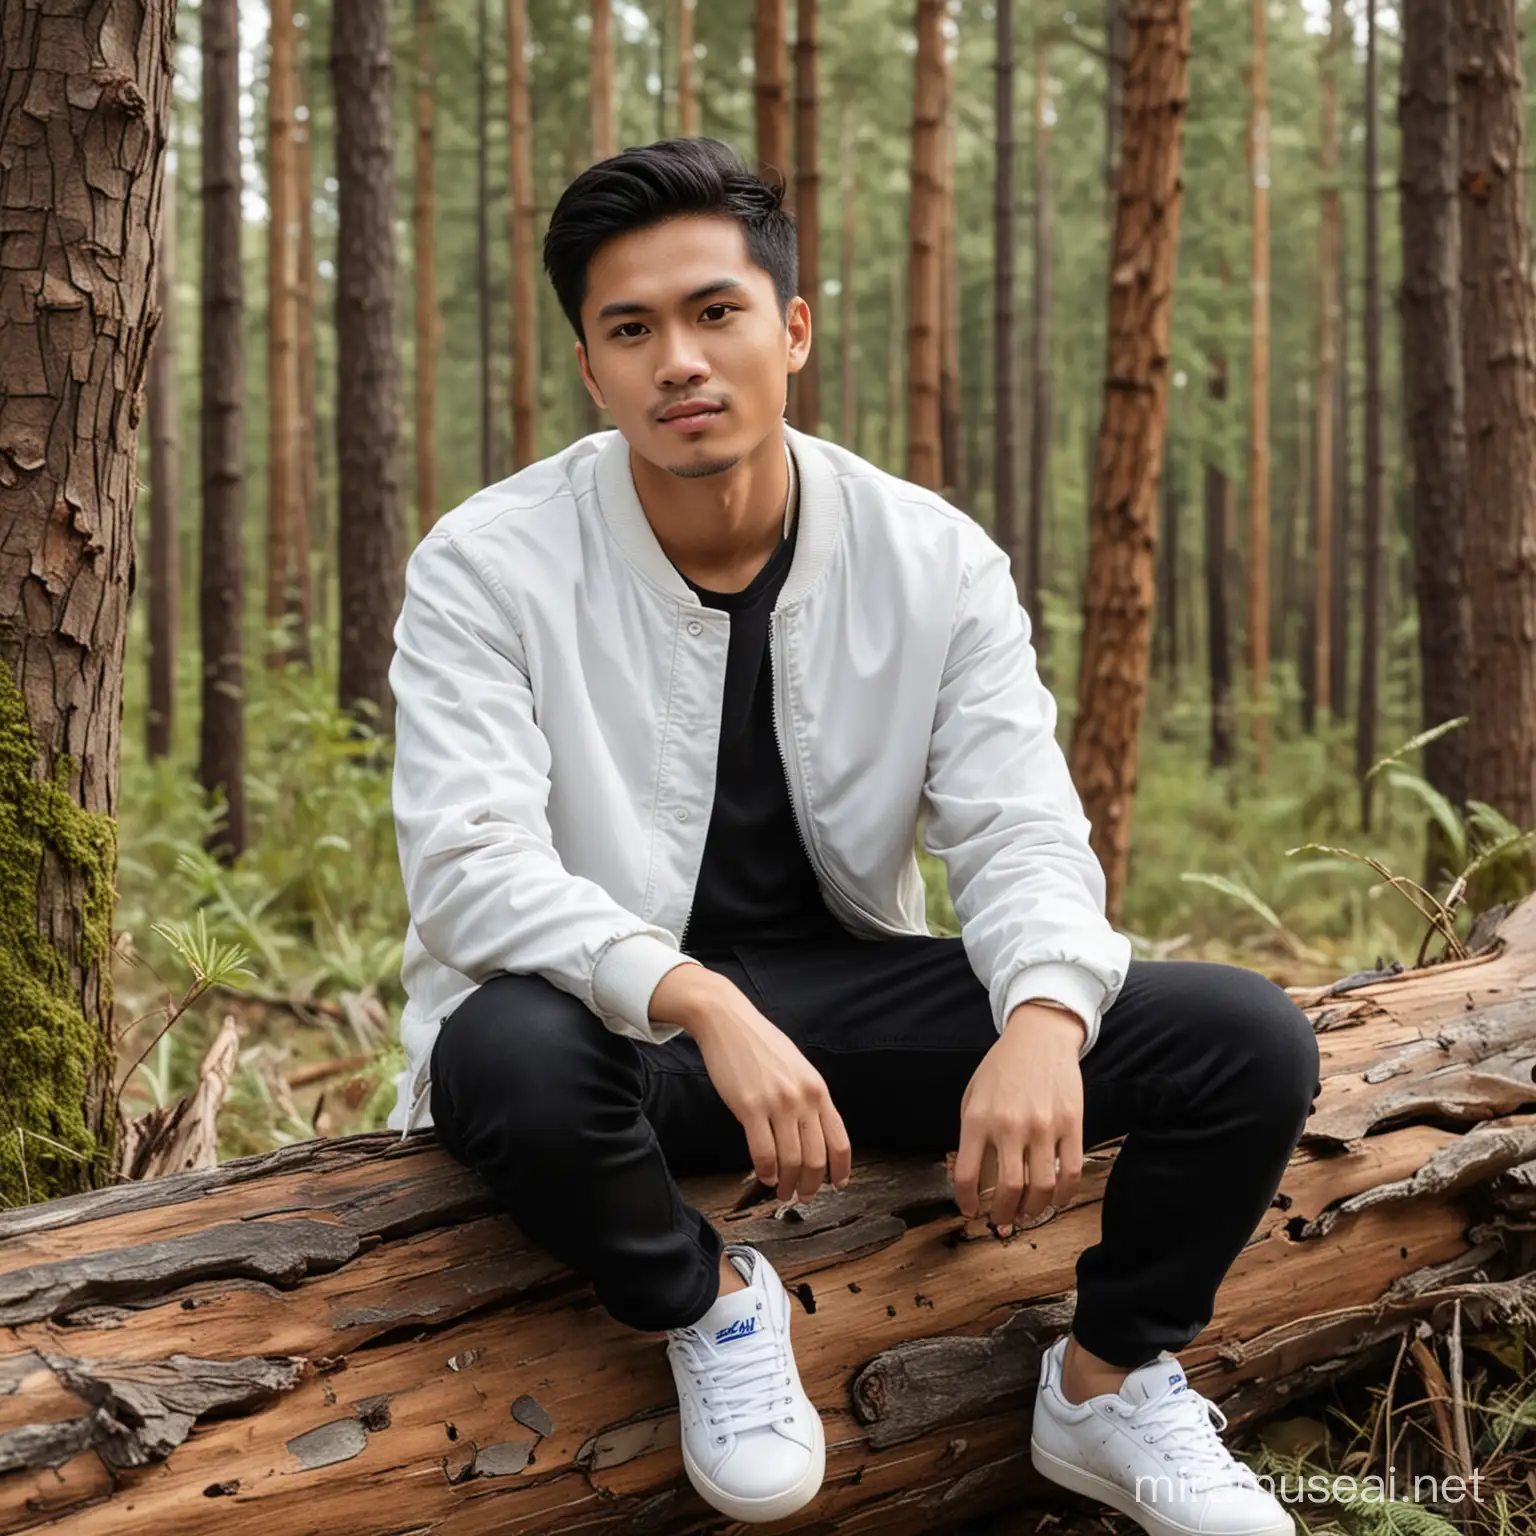 Indonesian Man Sitting on Fallen Tree in Pine Forest